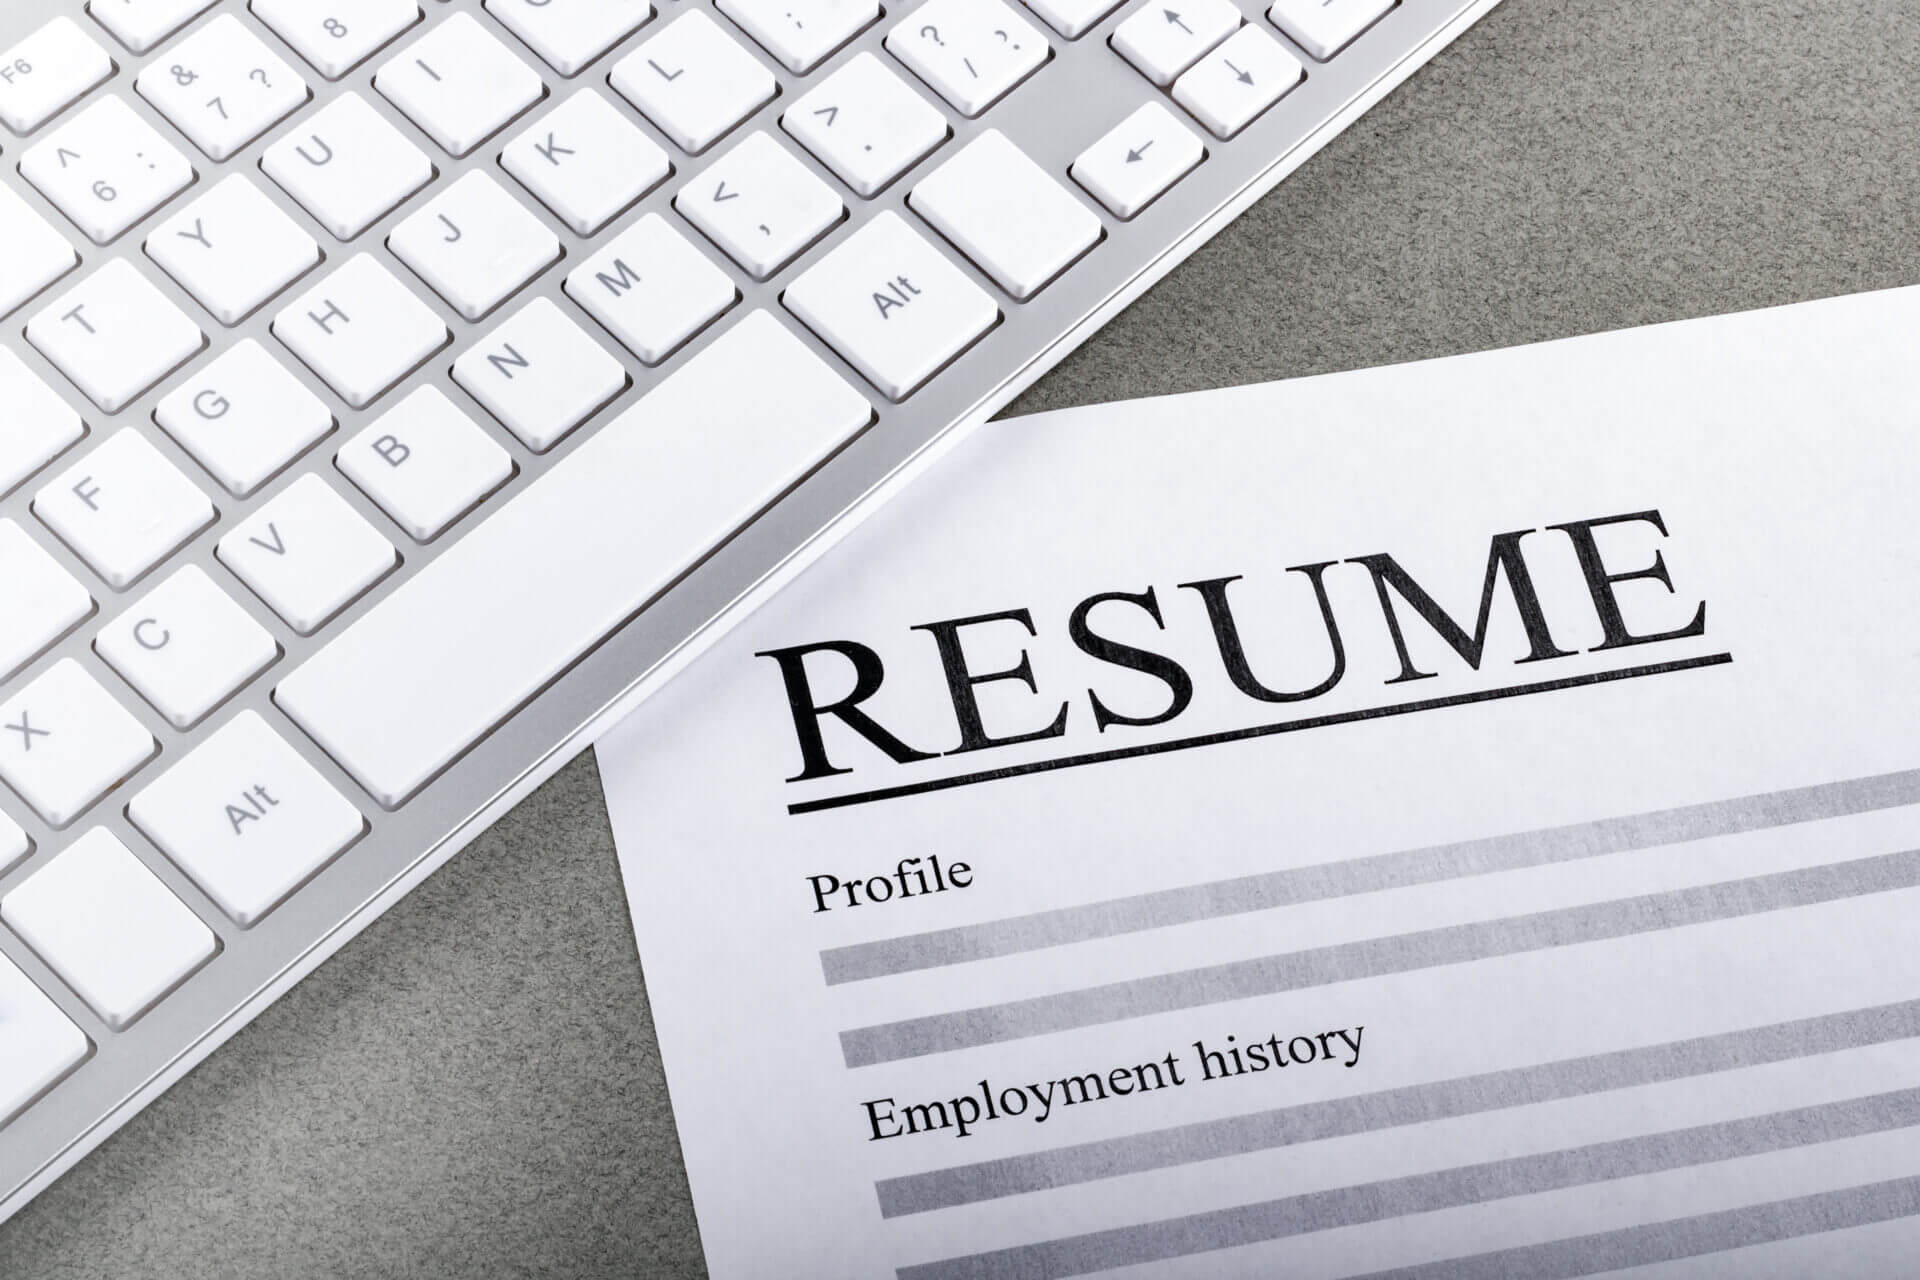 Resume Building - Soft Skills for Travel Nurses and Therapists